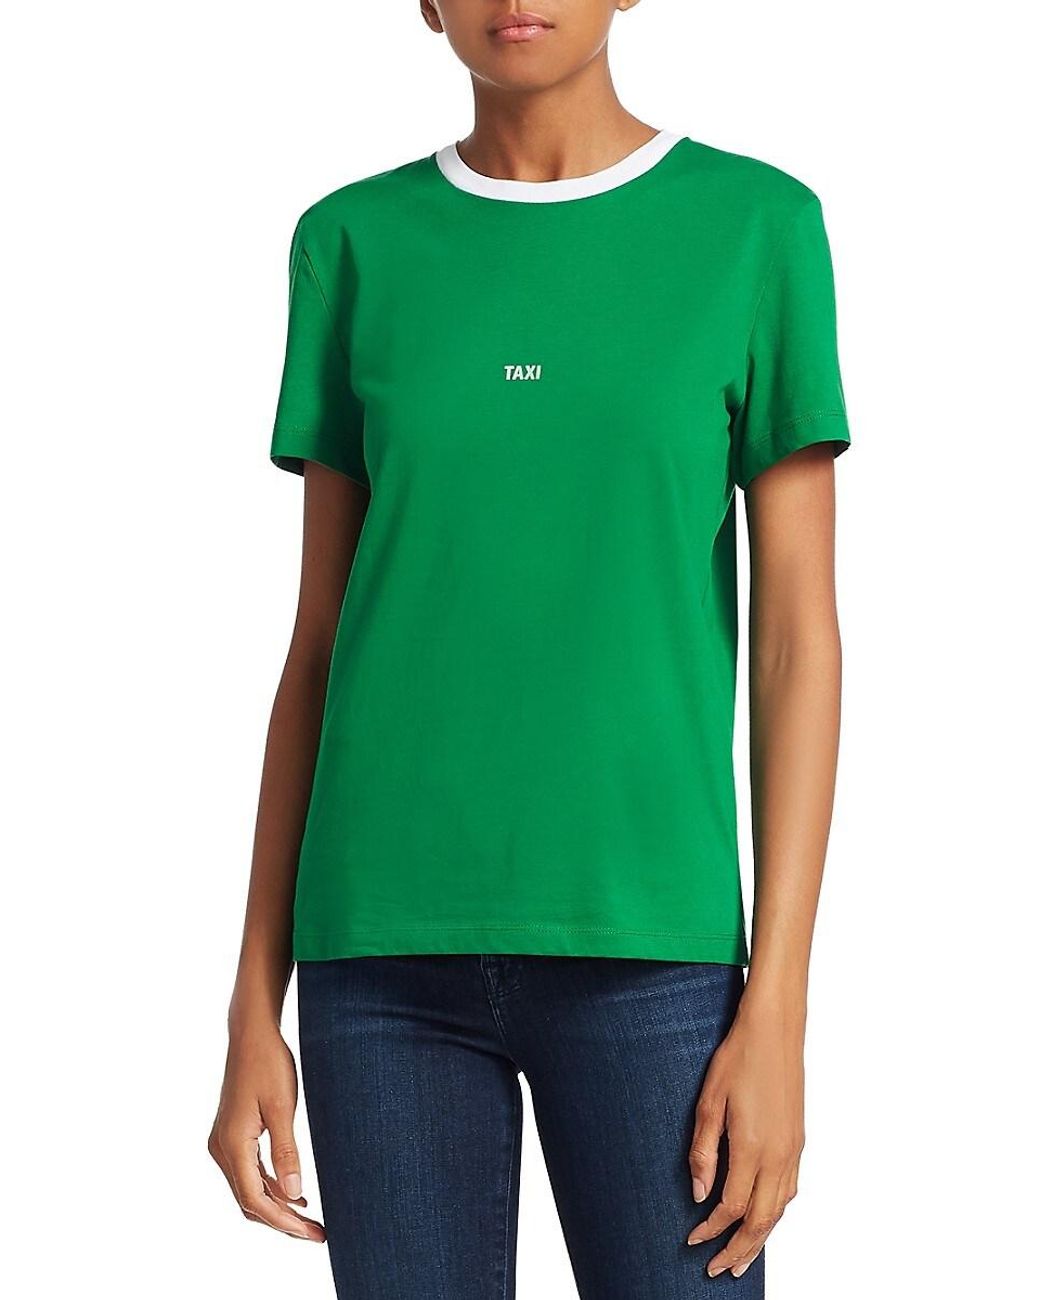 Helmut Lang Paris Taxi Tee in Green | Lyst